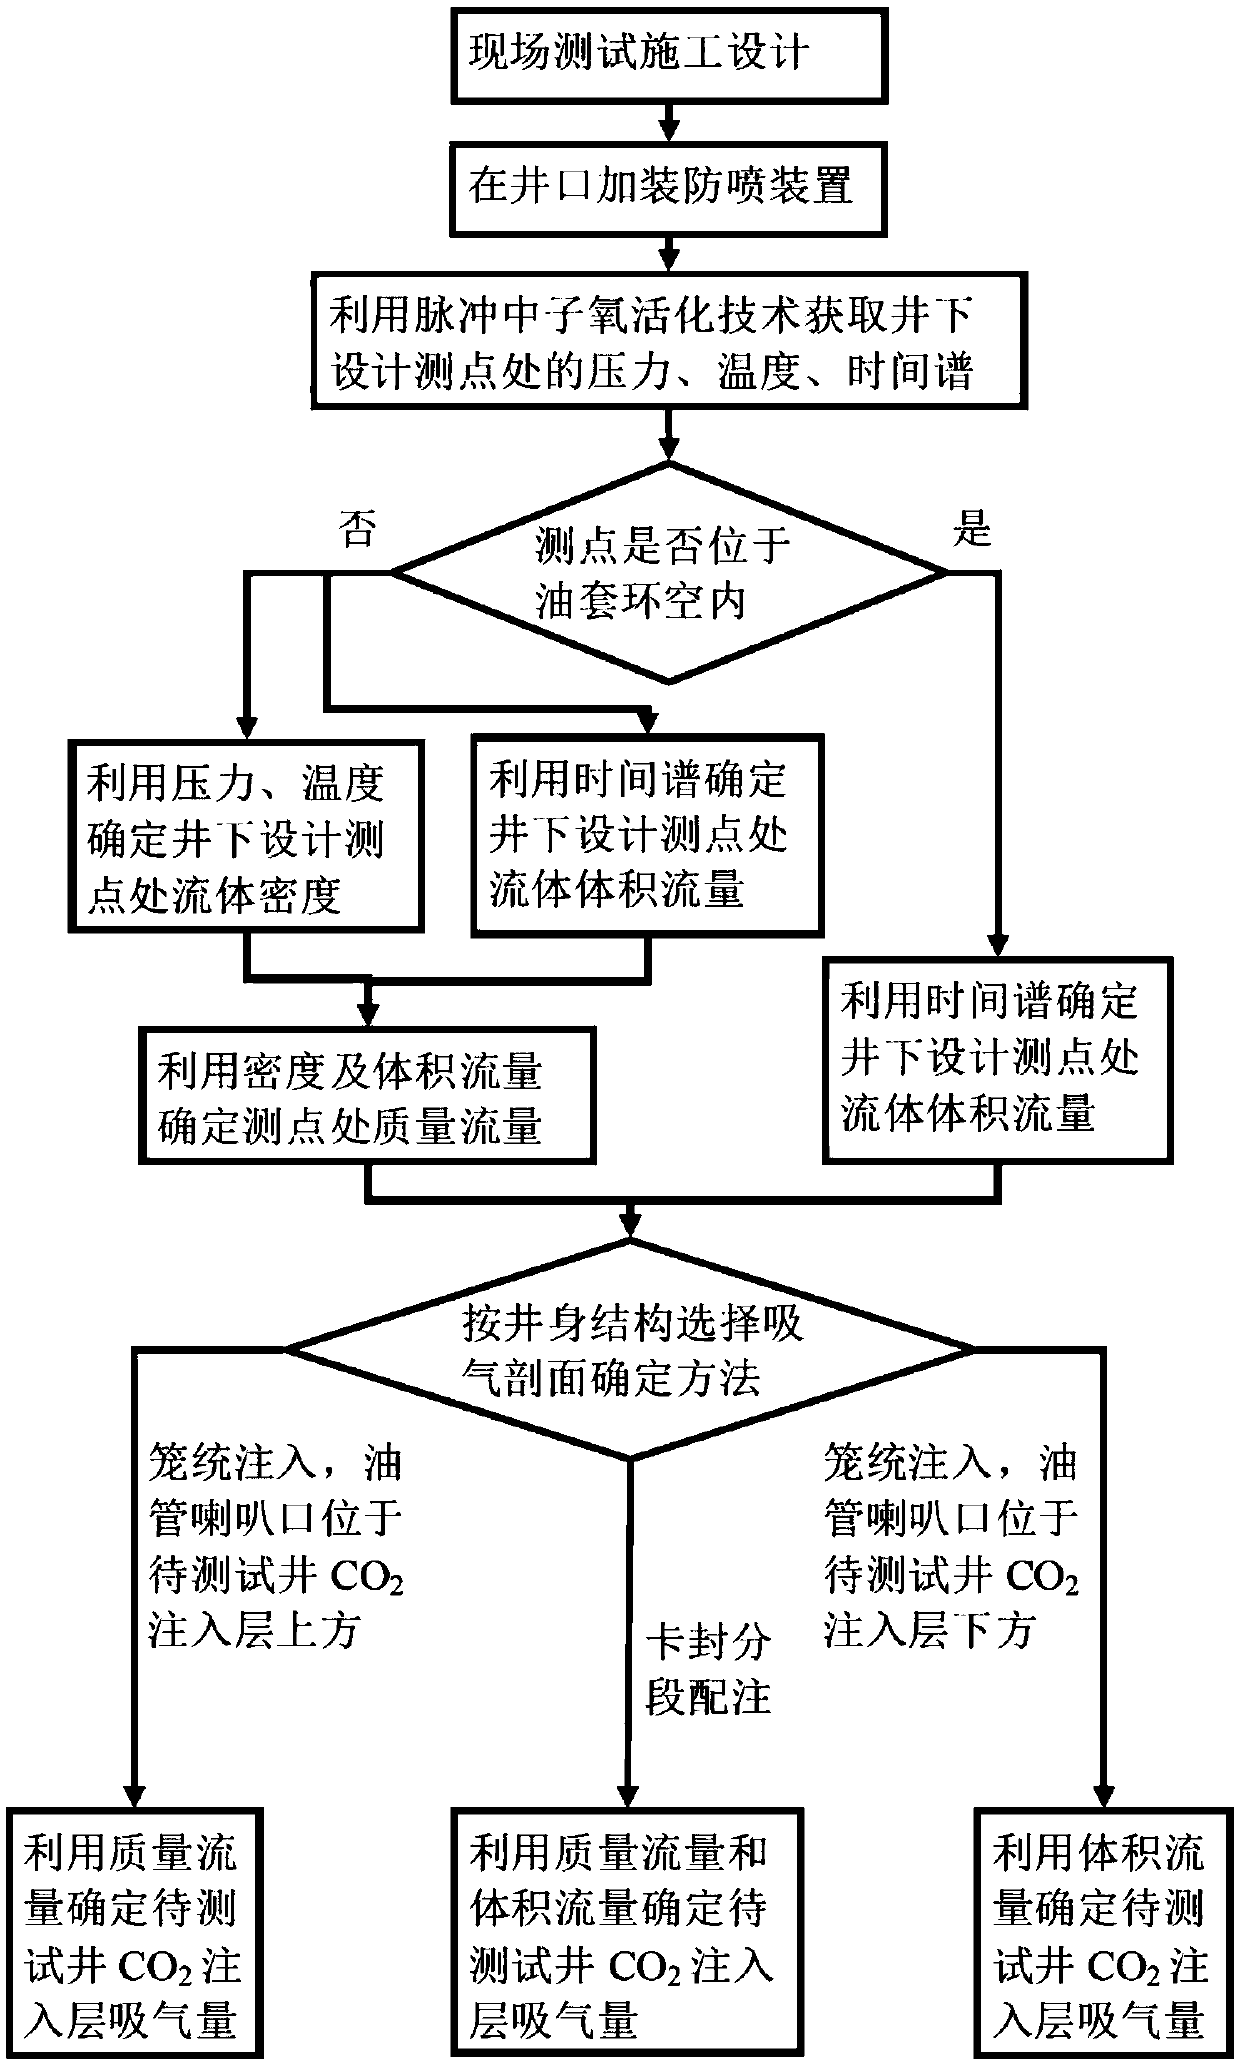 CO2 drive flow rate monitoring method